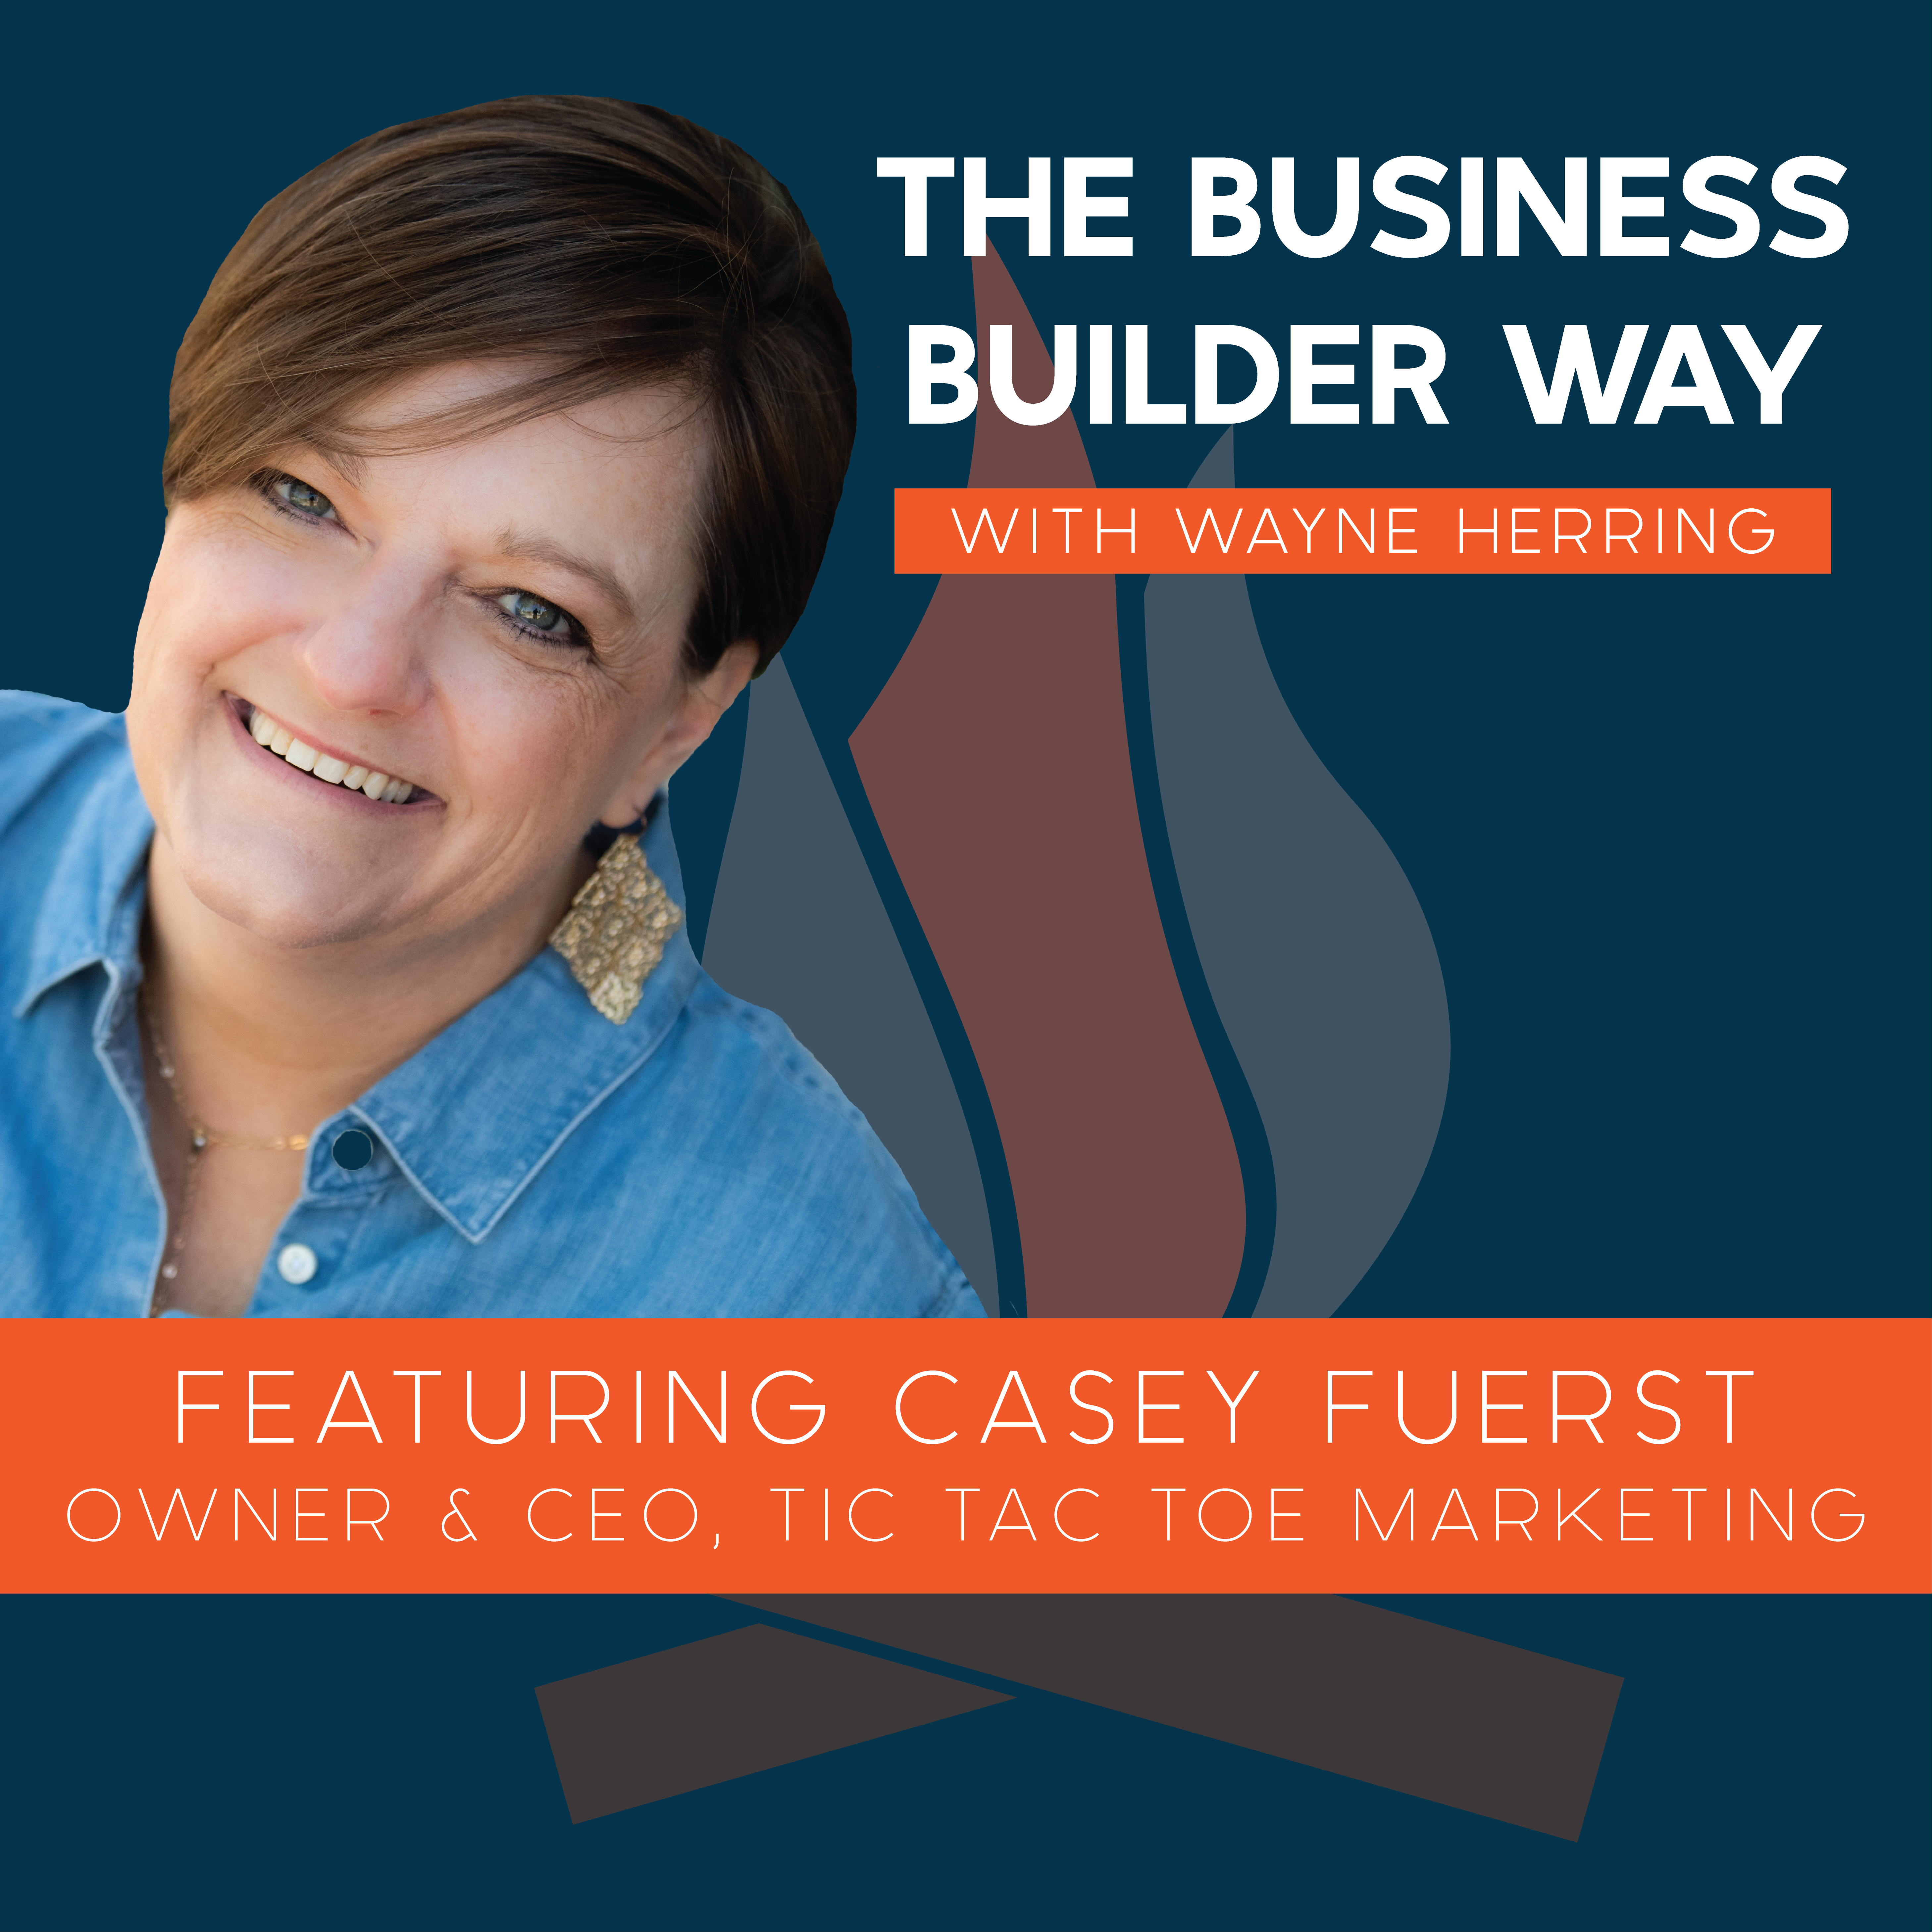 Business Builder Way Podcast image featuring Casey Fuerst owner of Tic Tac Toe Marketing.